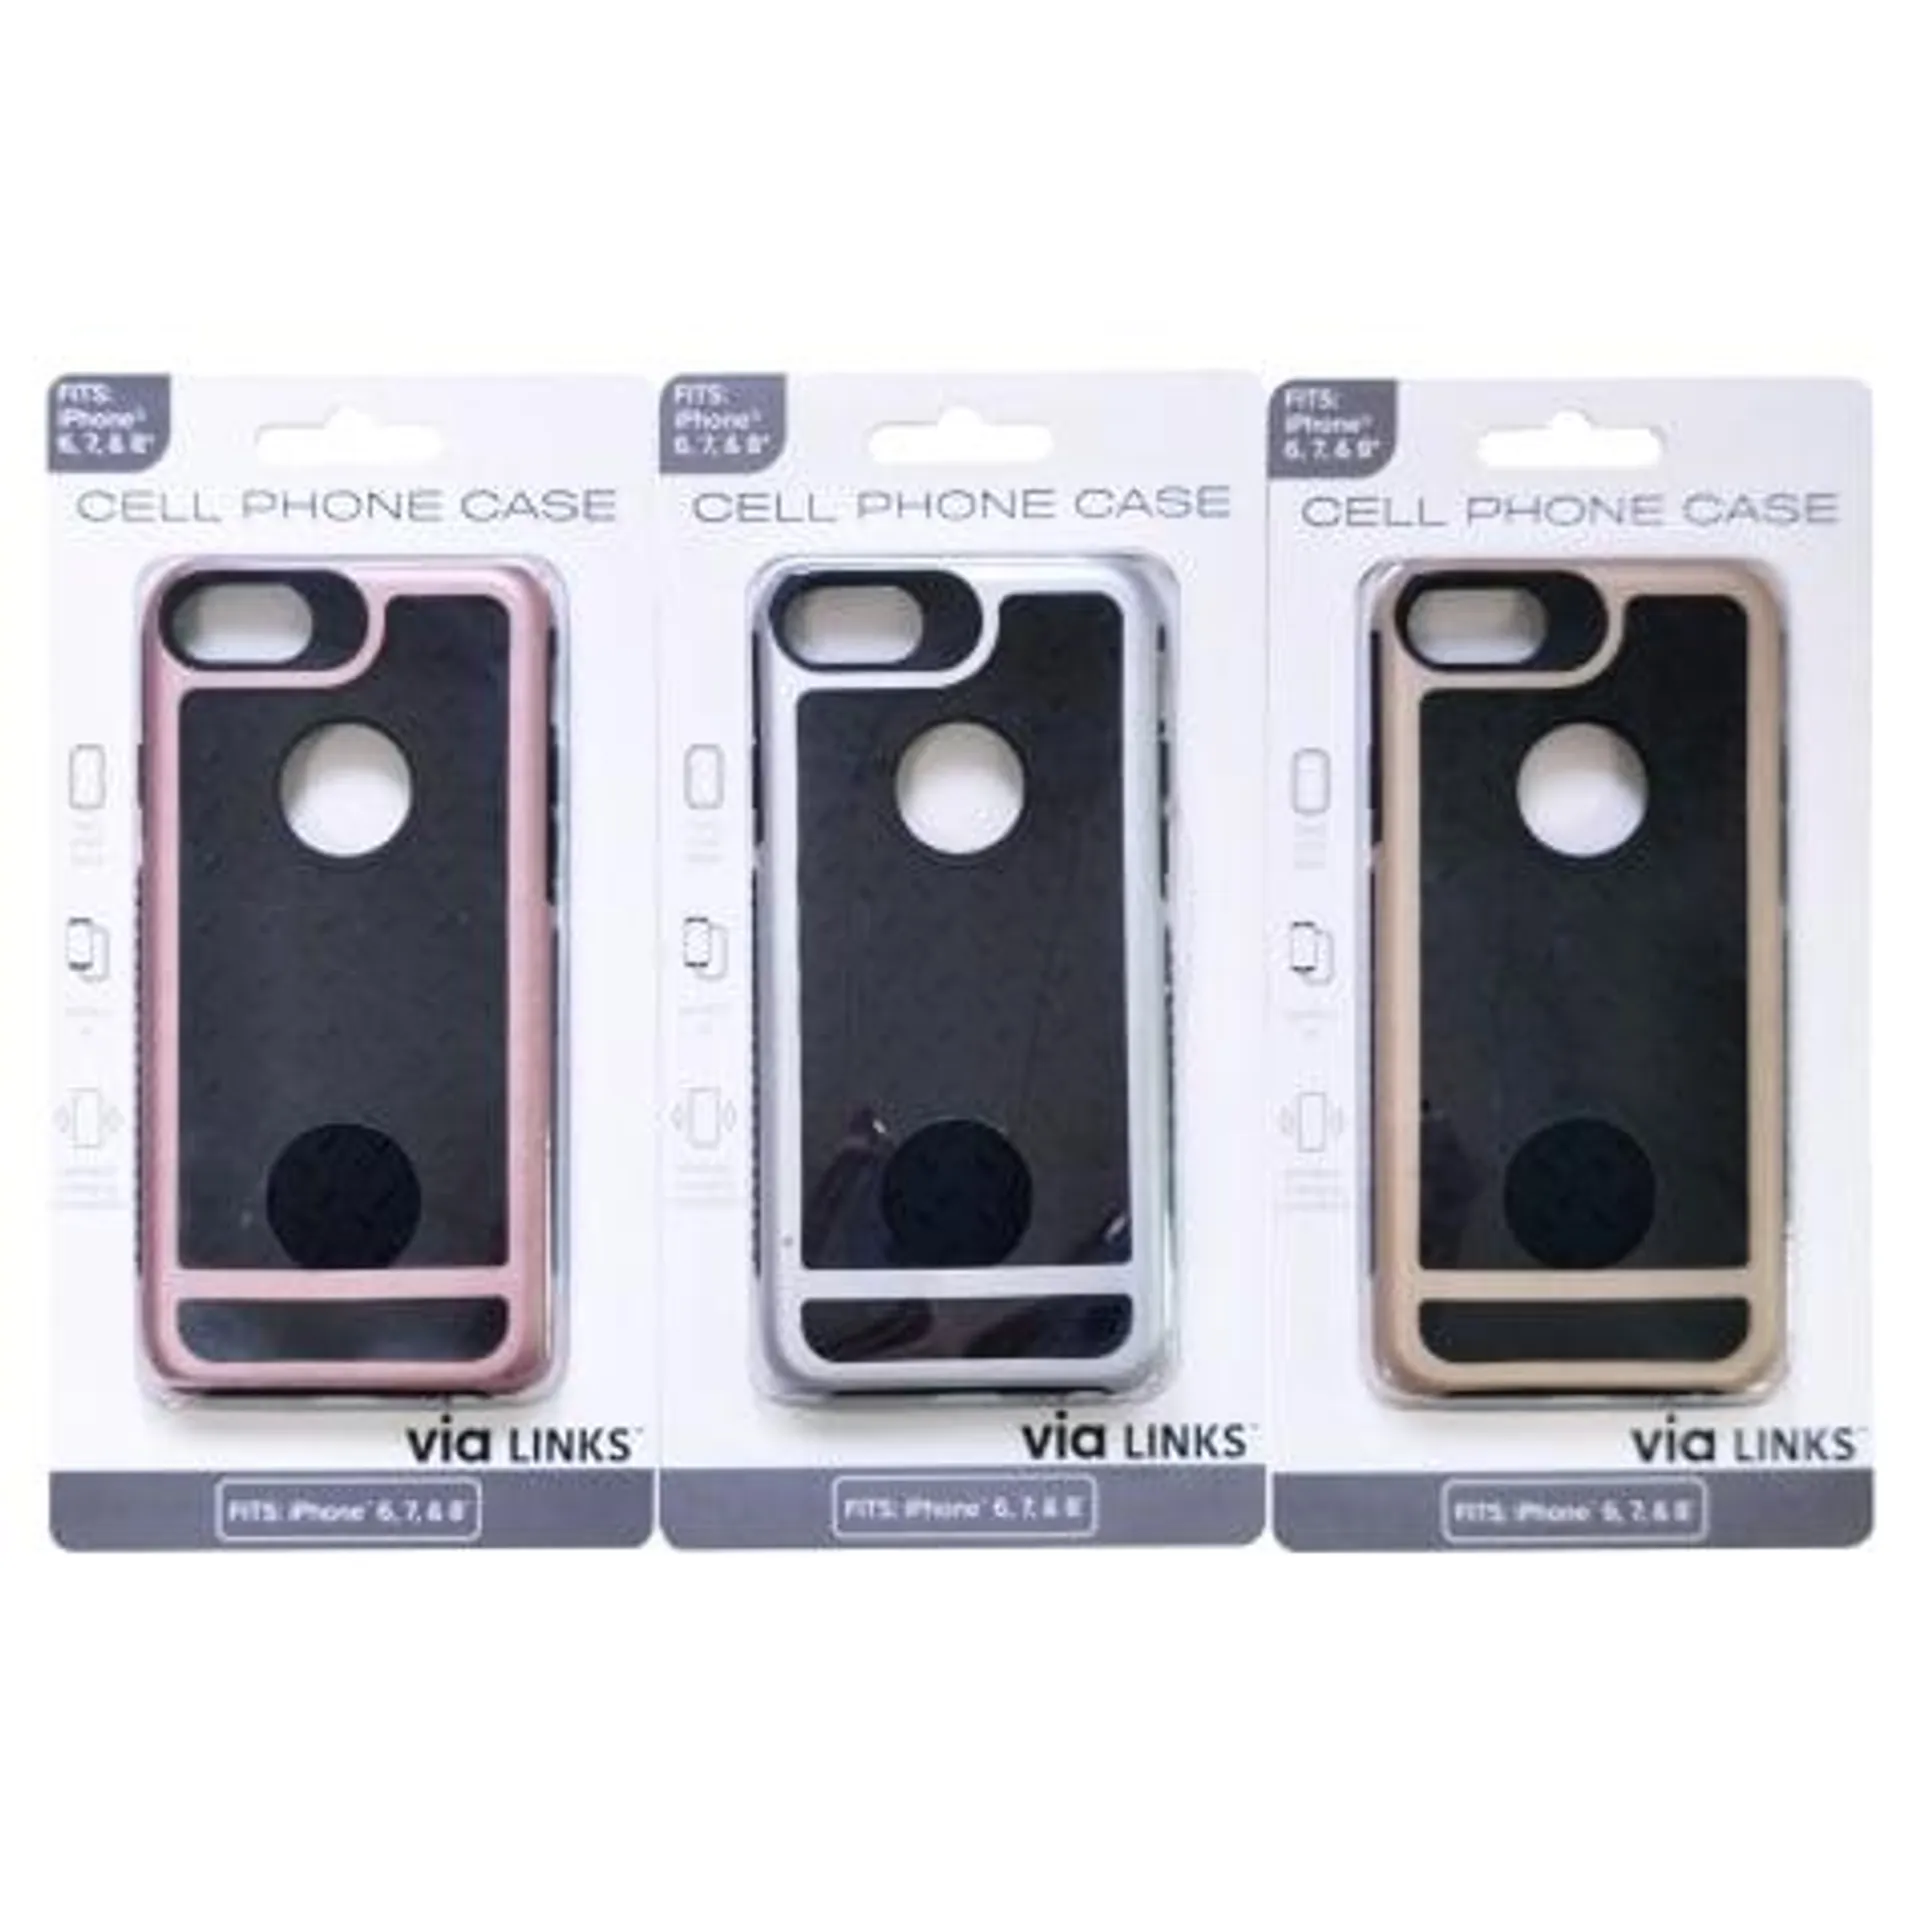 Via Links iPhone 6, 7, and 8 Cases Assorted